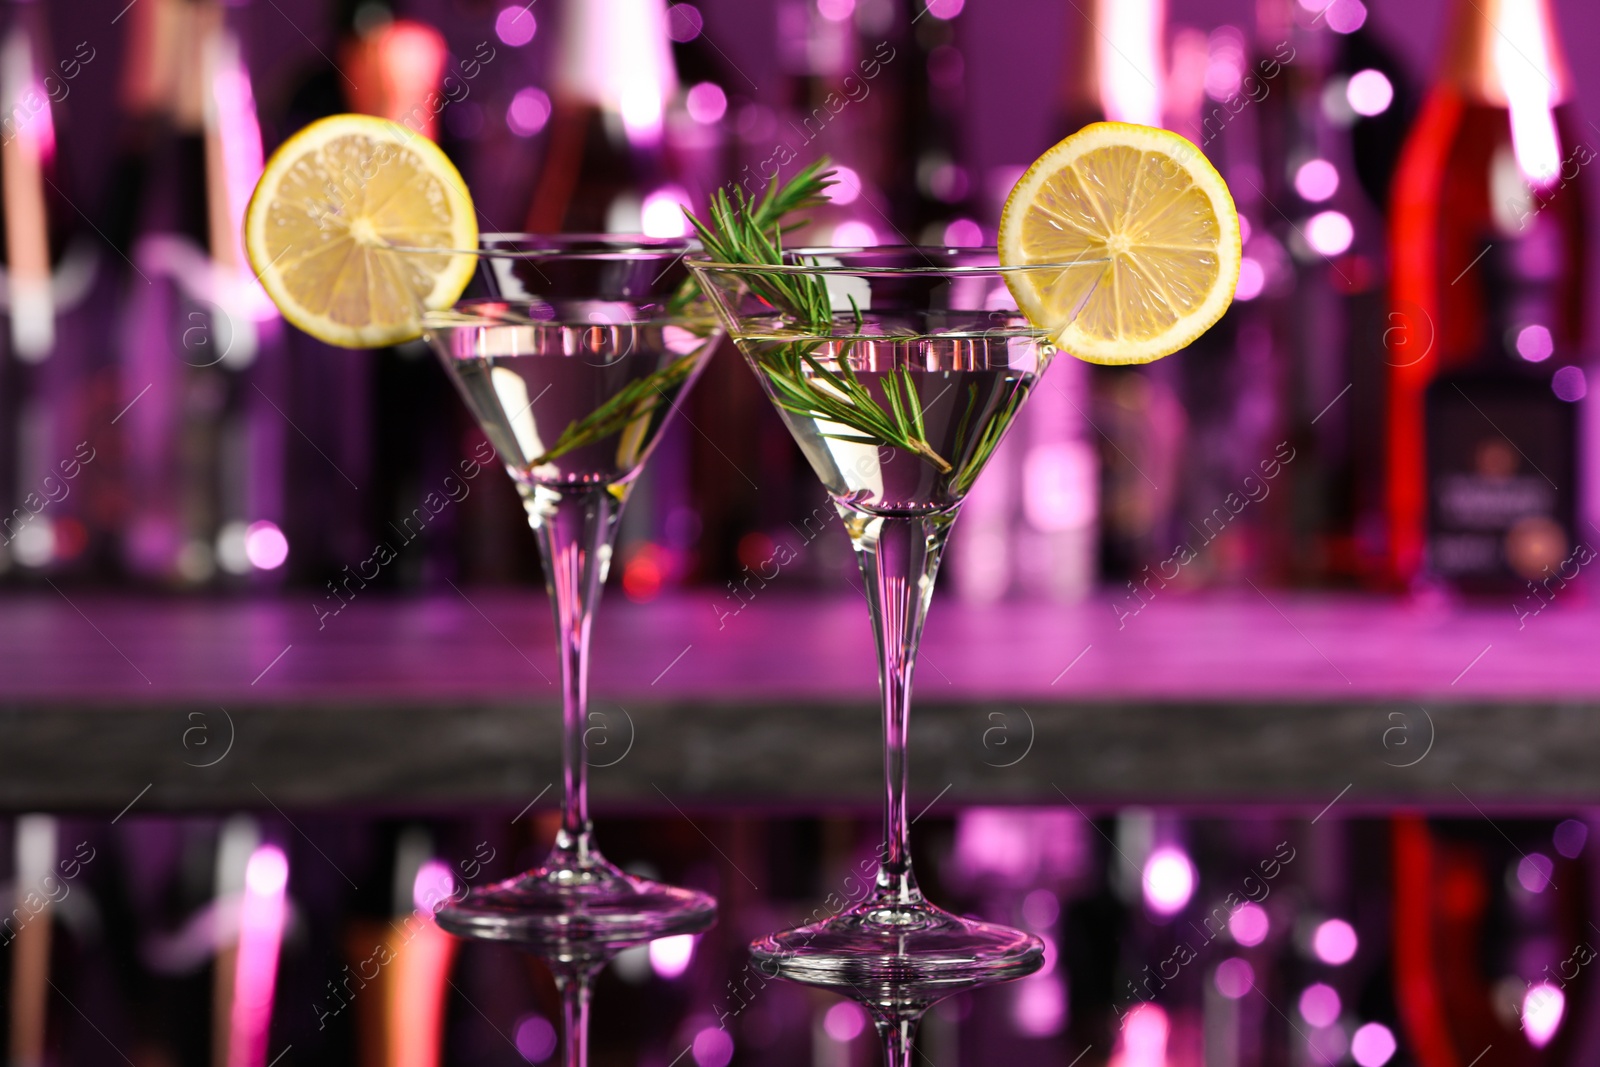 Photo of Martini glasses of refreshing cocktail, lemon slices and rosemary on mirror surface